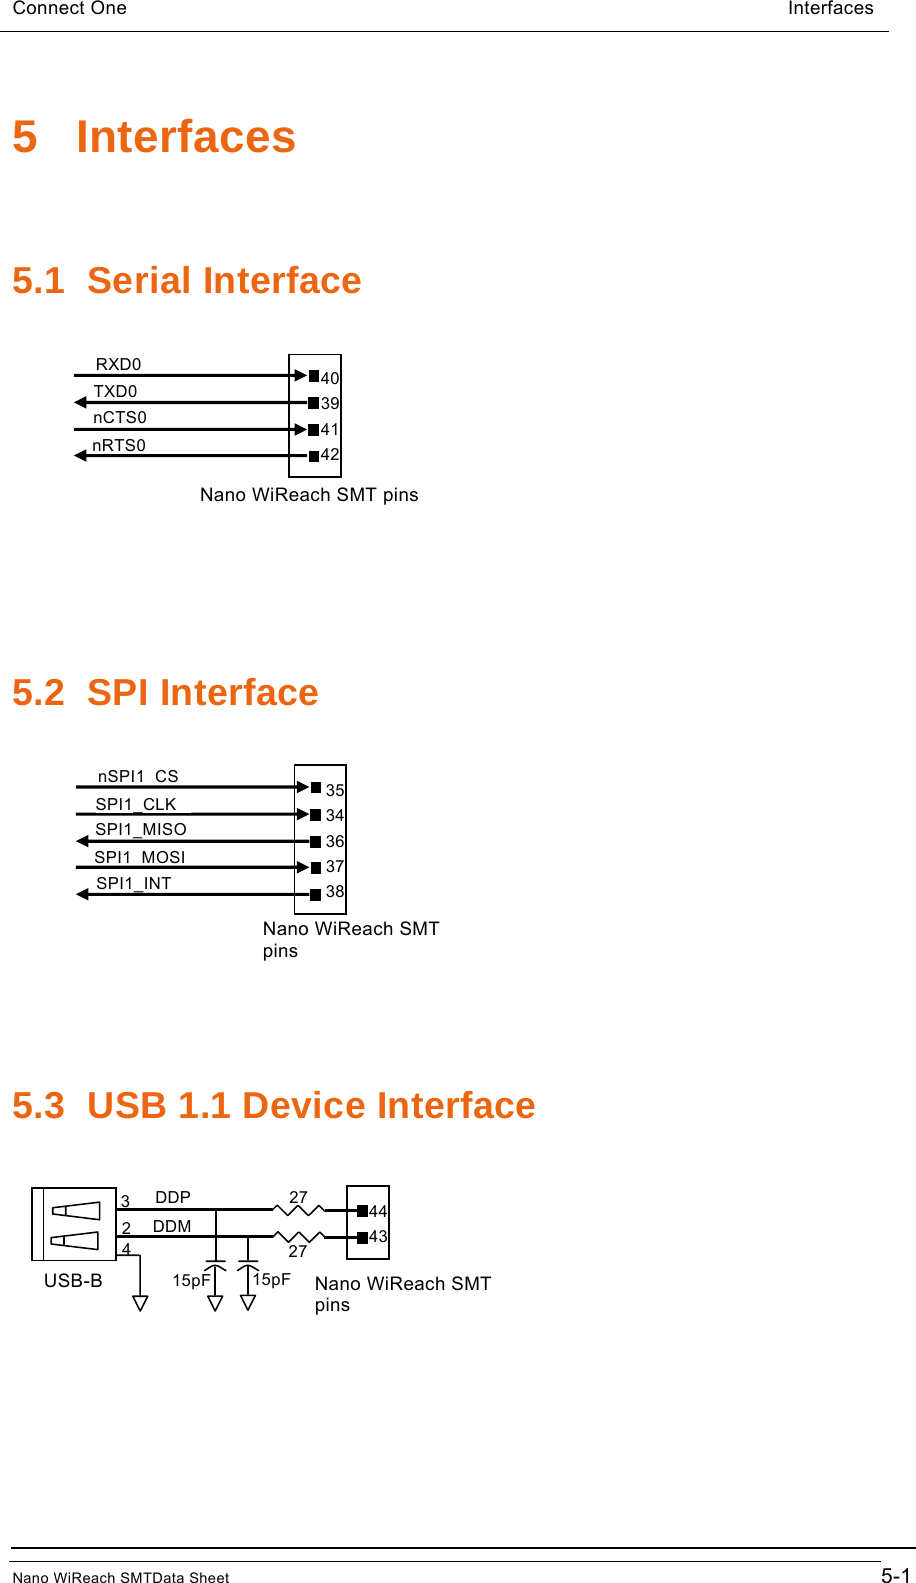 Connect One                                                            Interfaces    5 Interfaces  5.1 Serial Interface          5.2 SPI Interface          5.3  USB 1.1 Device Interface nSPI1 CS SPI1_CLK SPI1_MISO SPI1 MOSI SPI1_INT Nano WiReach SMT pins DDPDDMNano WiReach SMT pins2 3 USB-B 27 27 15pF  15pF 4 RXD0 TXD0 nCTS0 nRTS0 Nano WiReach SMT pins 4039414235343637384443     Nano WiReach SMTData Sheet                                        5-1 